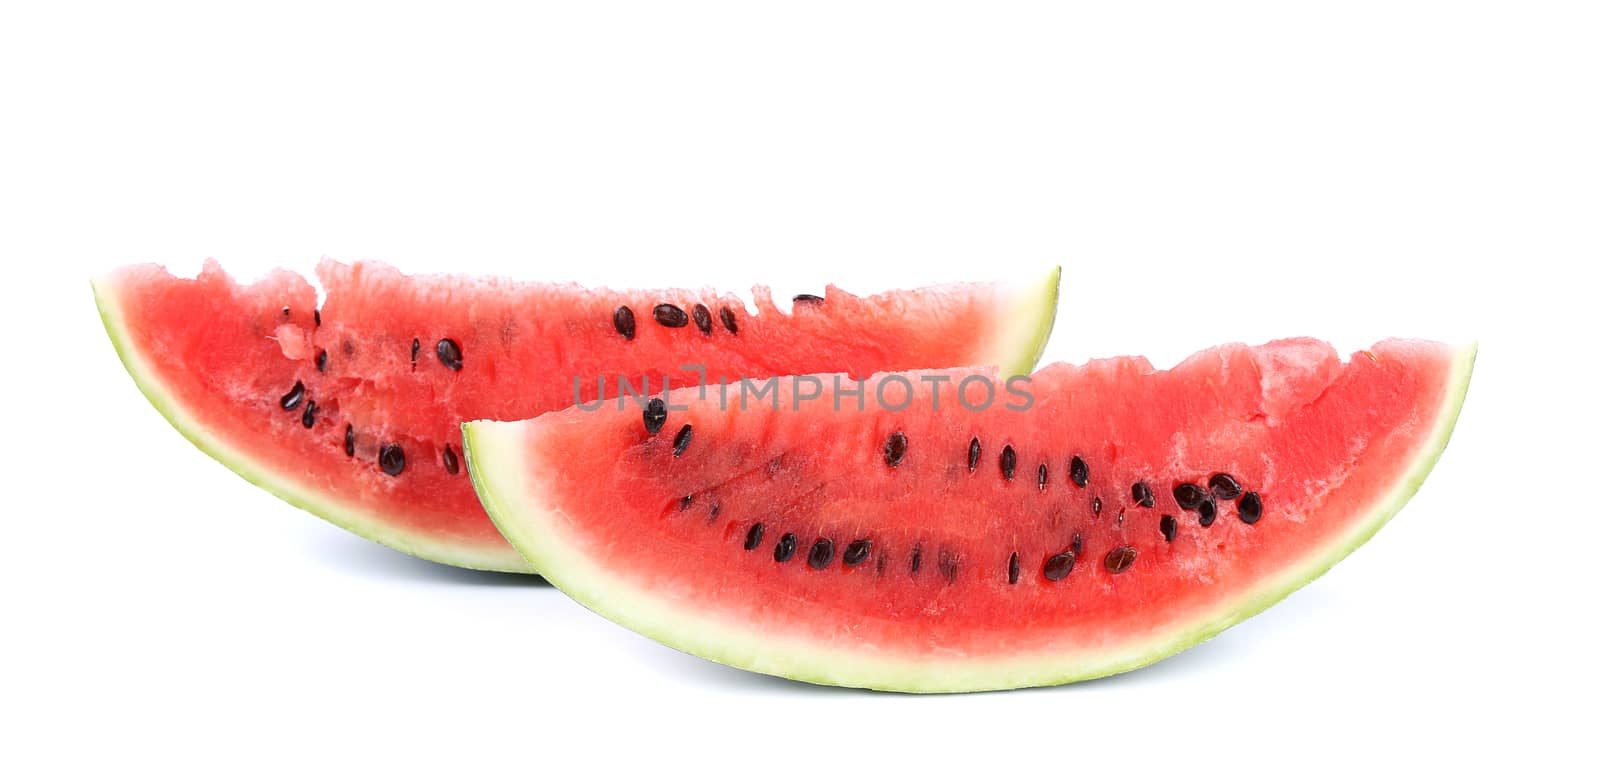 Slices of watermelon on a white background by indigolotos